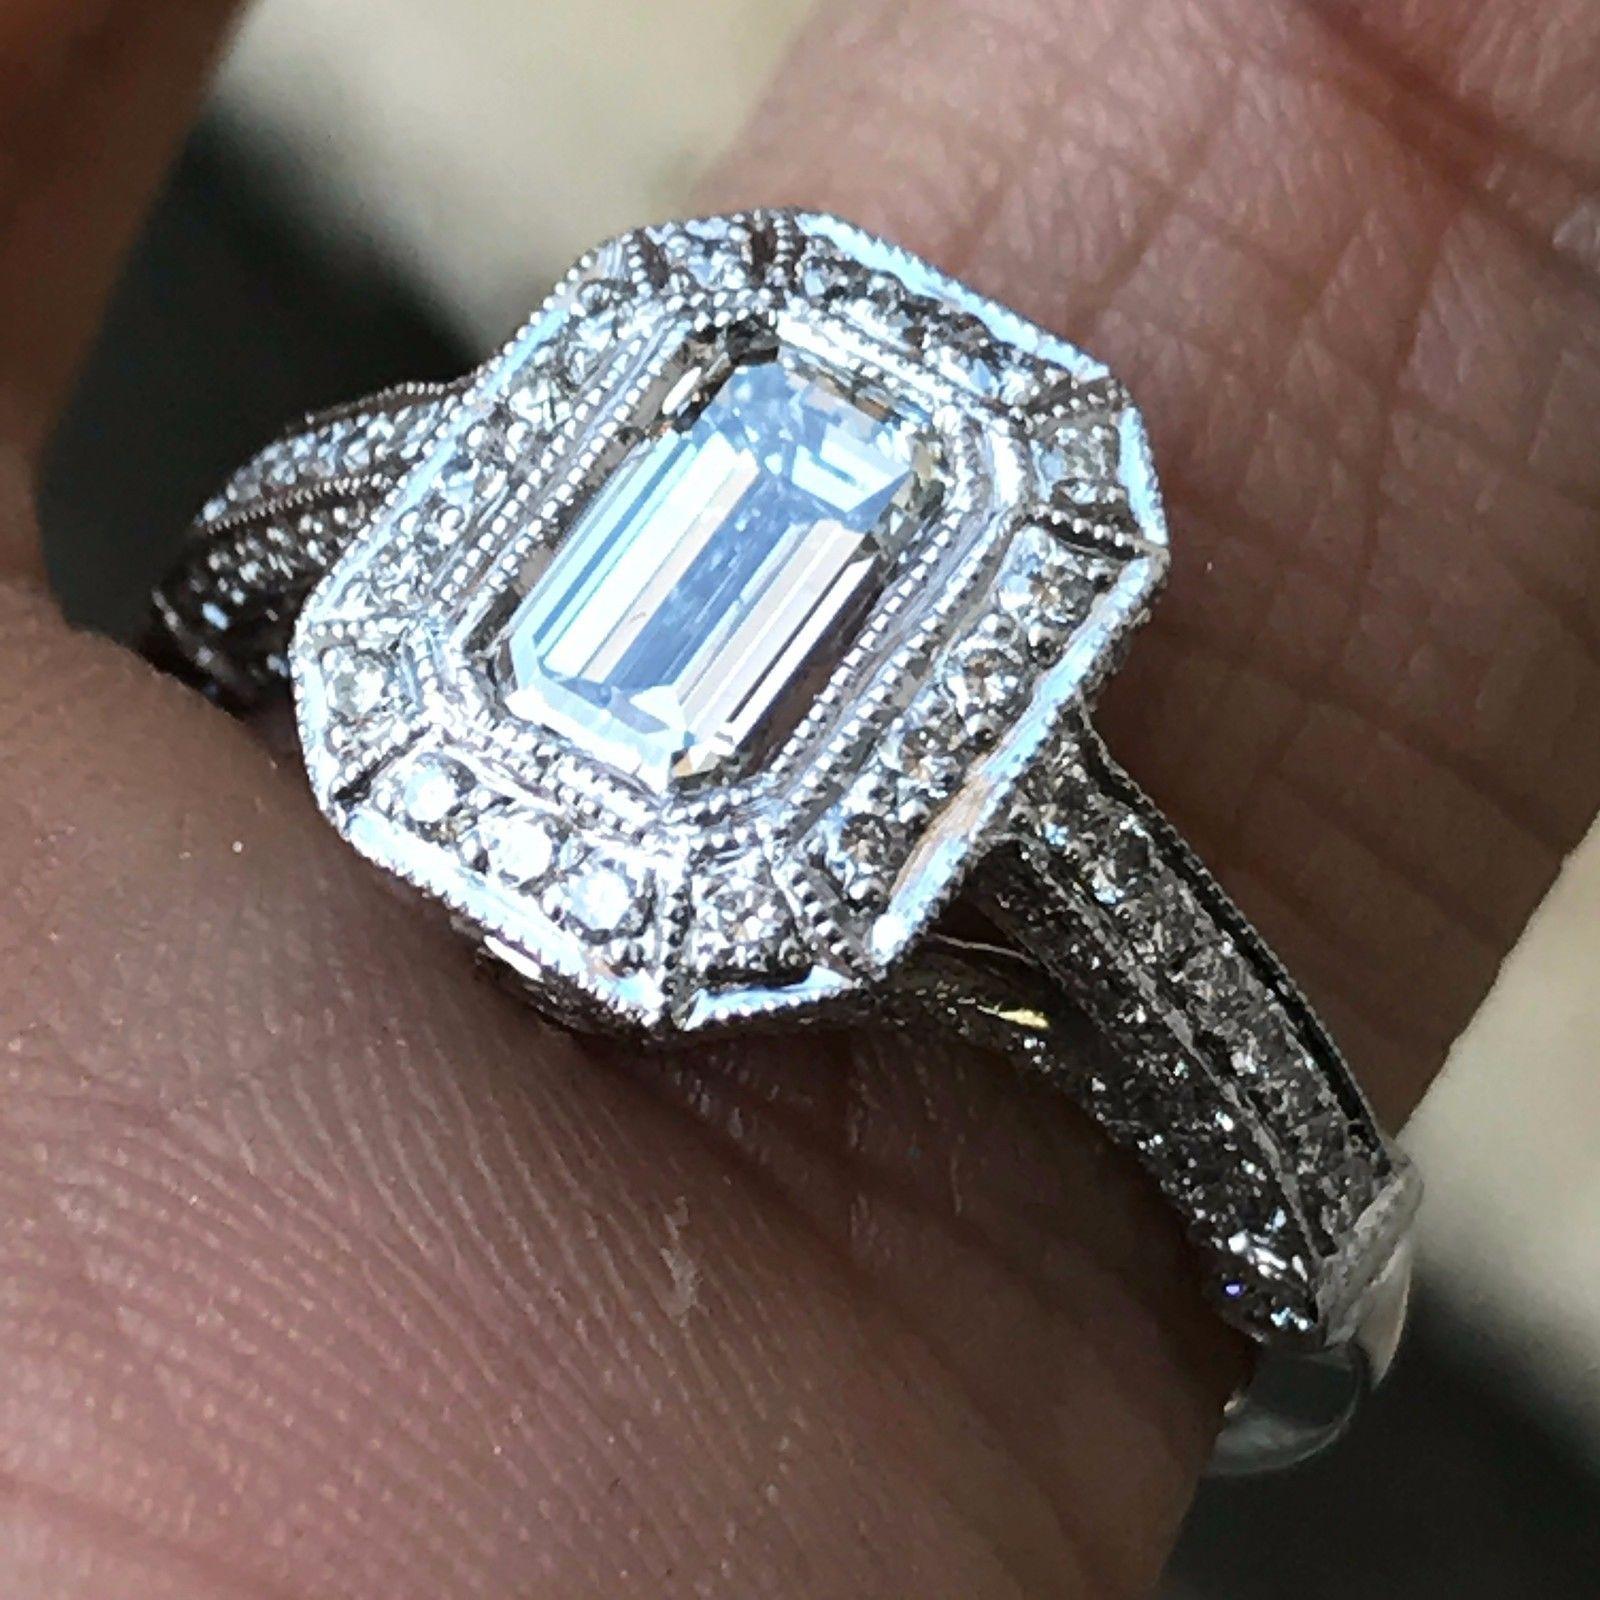 Emerald Cut Diamond Engagement Ring, 1.70 Carats TW , H SI1 . Set in Platinum

Ring Will be made to order from scratch to accommodate your exact finger size 

or a different stone if the budget requires it, takes approximately 3-6 business